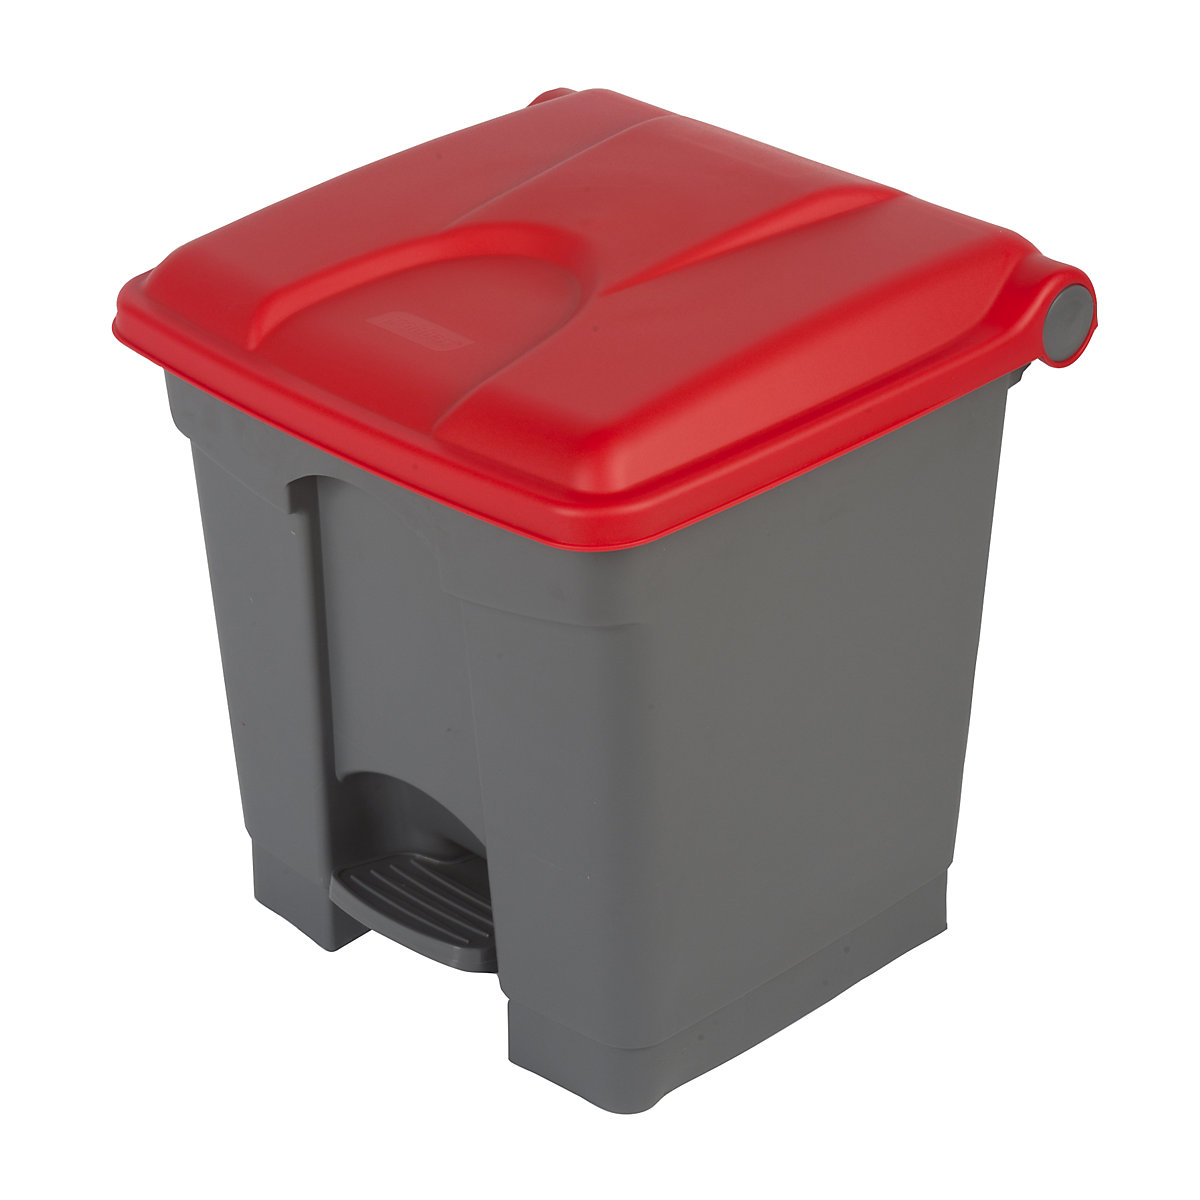 EUROKRAFTbasic – Pedal waste collector, capacity 30 l, WxHxD 410 x 435 x 400 mm, grey, red lid